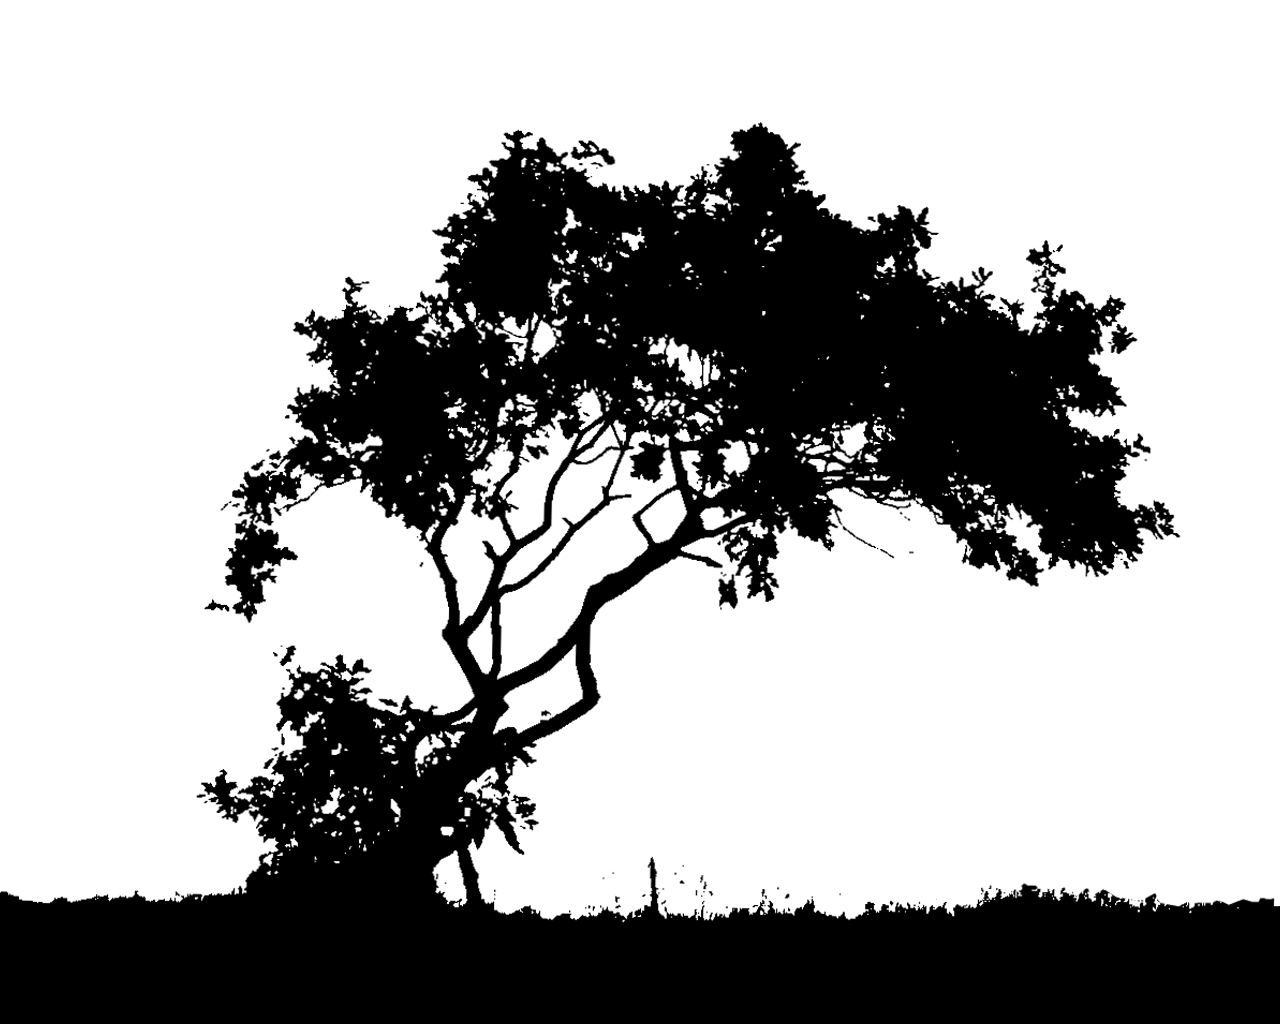 1000 Black And White Tree Pictures  Download Free Images on Unsplash